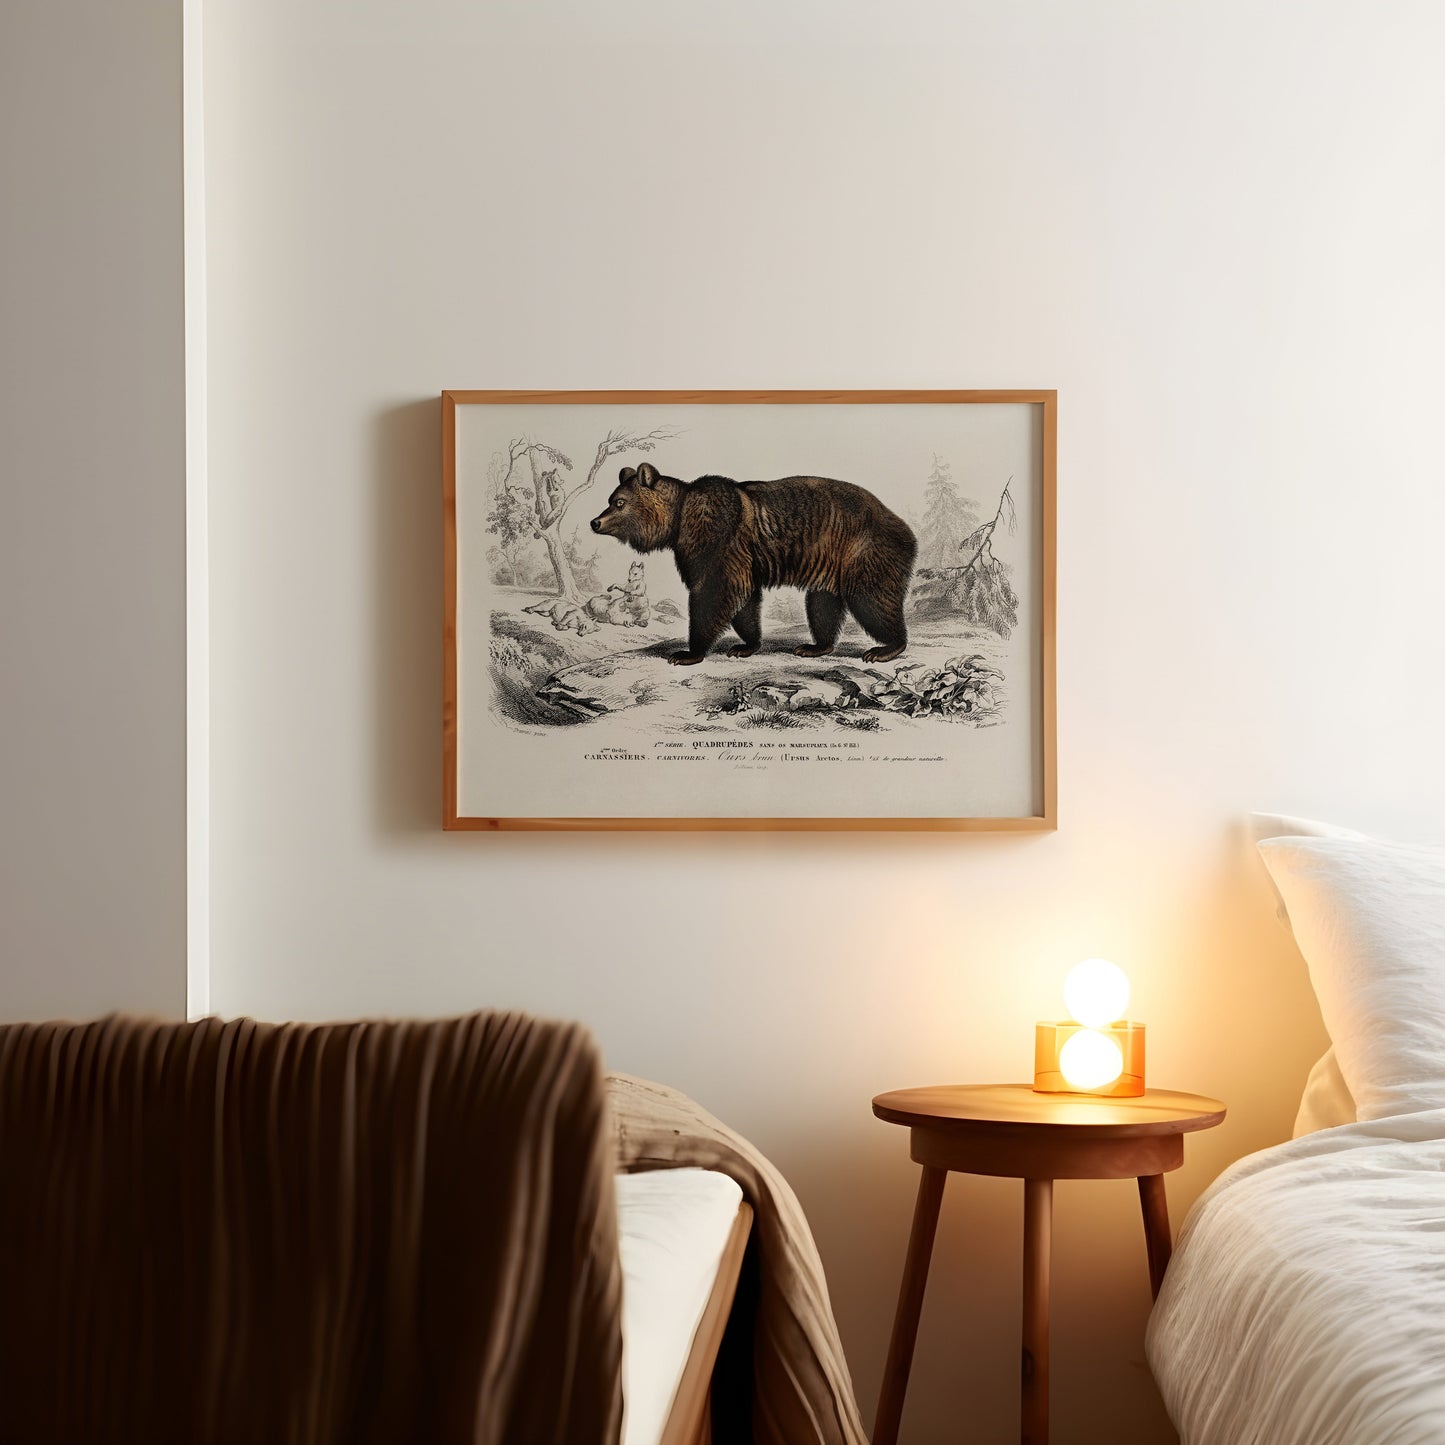 a picture of a bear on a wall above a bed